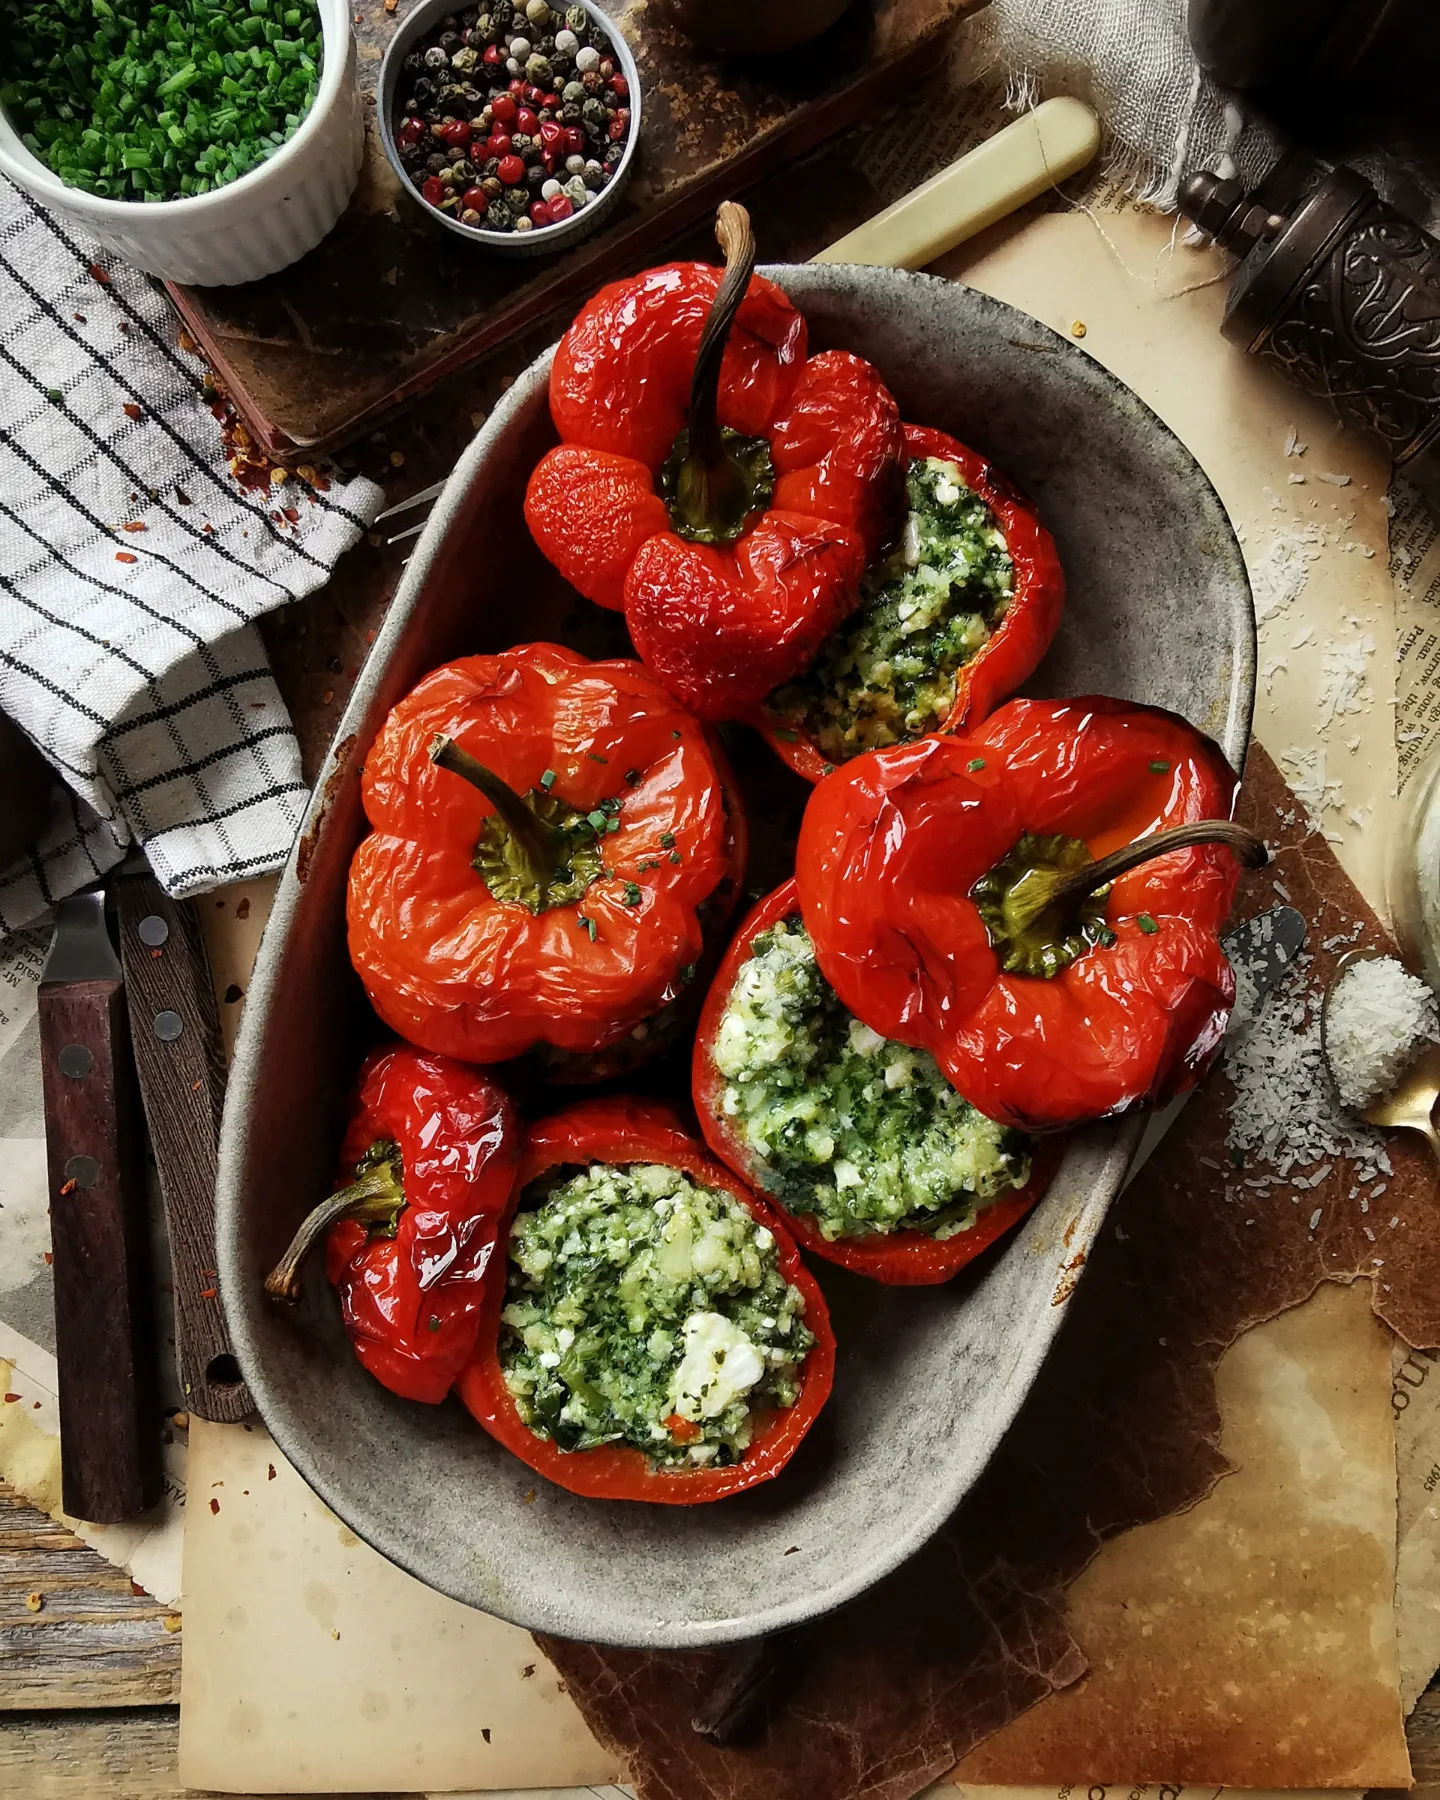 Spinach and feta stuffed peppers